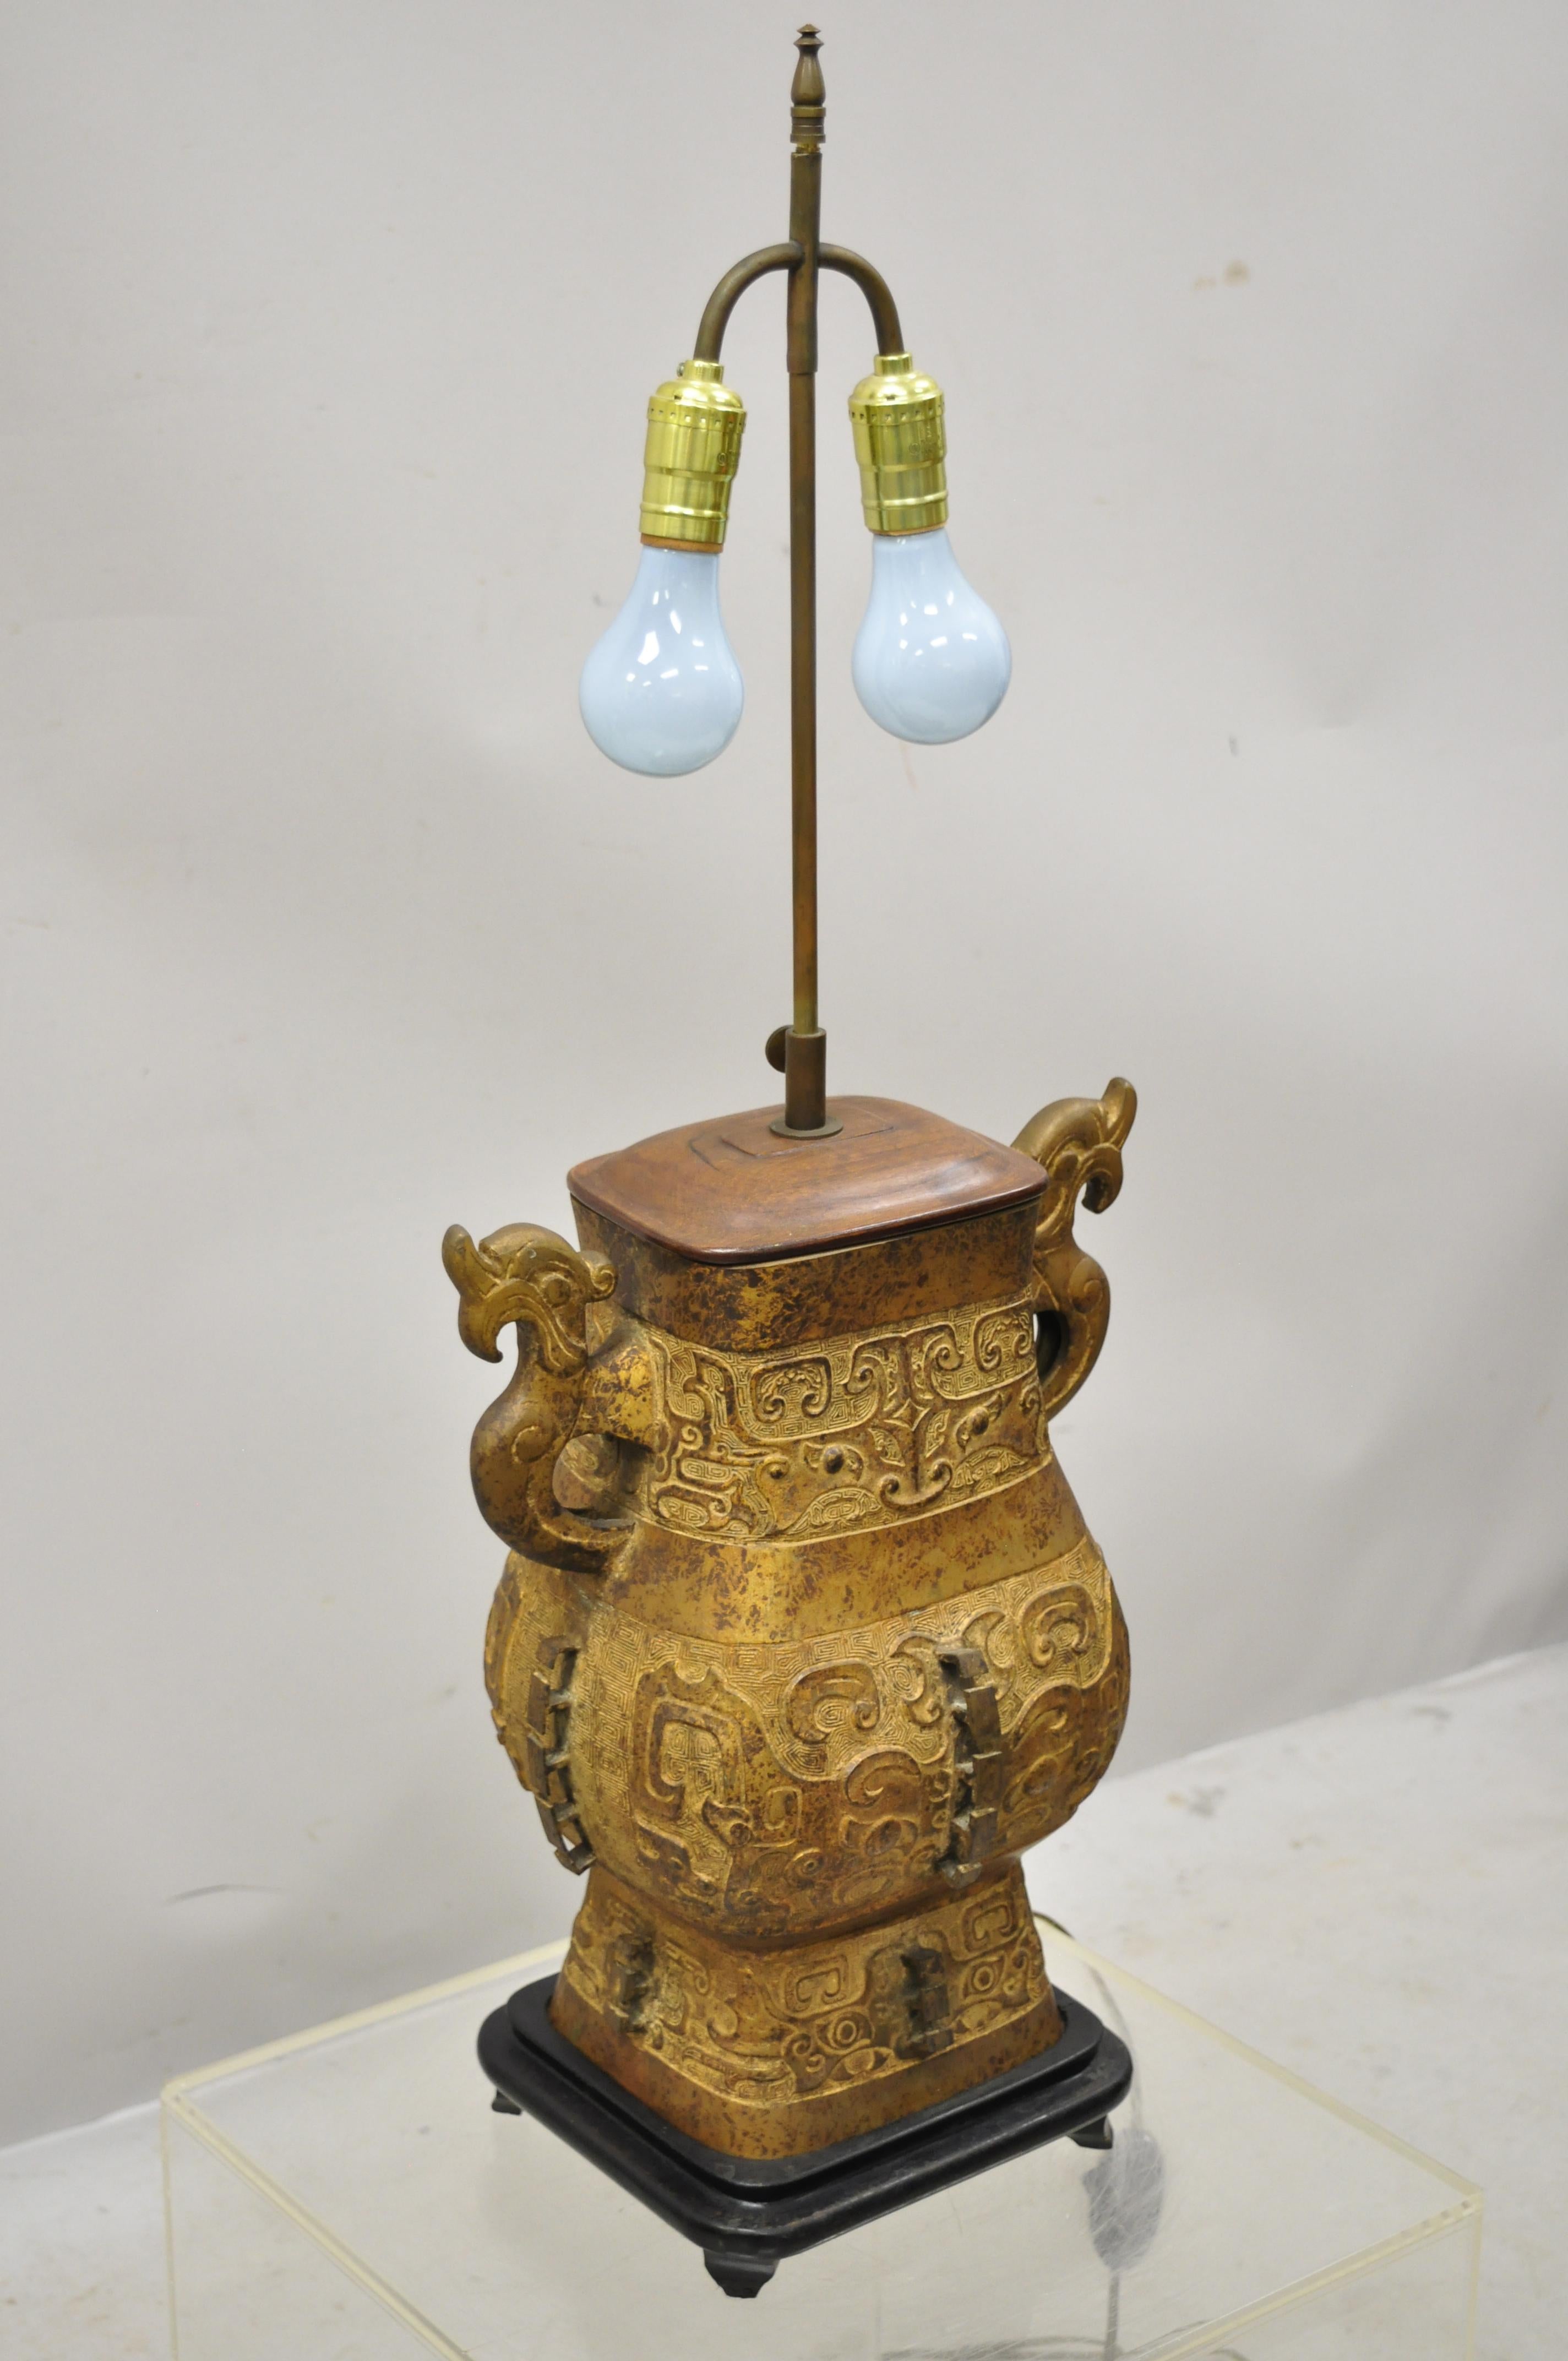 Antique Chinese gilt bronze and rosewood figural double light table lamp. Item features etched bronze figural body, rosewood and brass accents, wooden base, double light sockets, very nice antique item, circa early 20th century. Measurements: 34